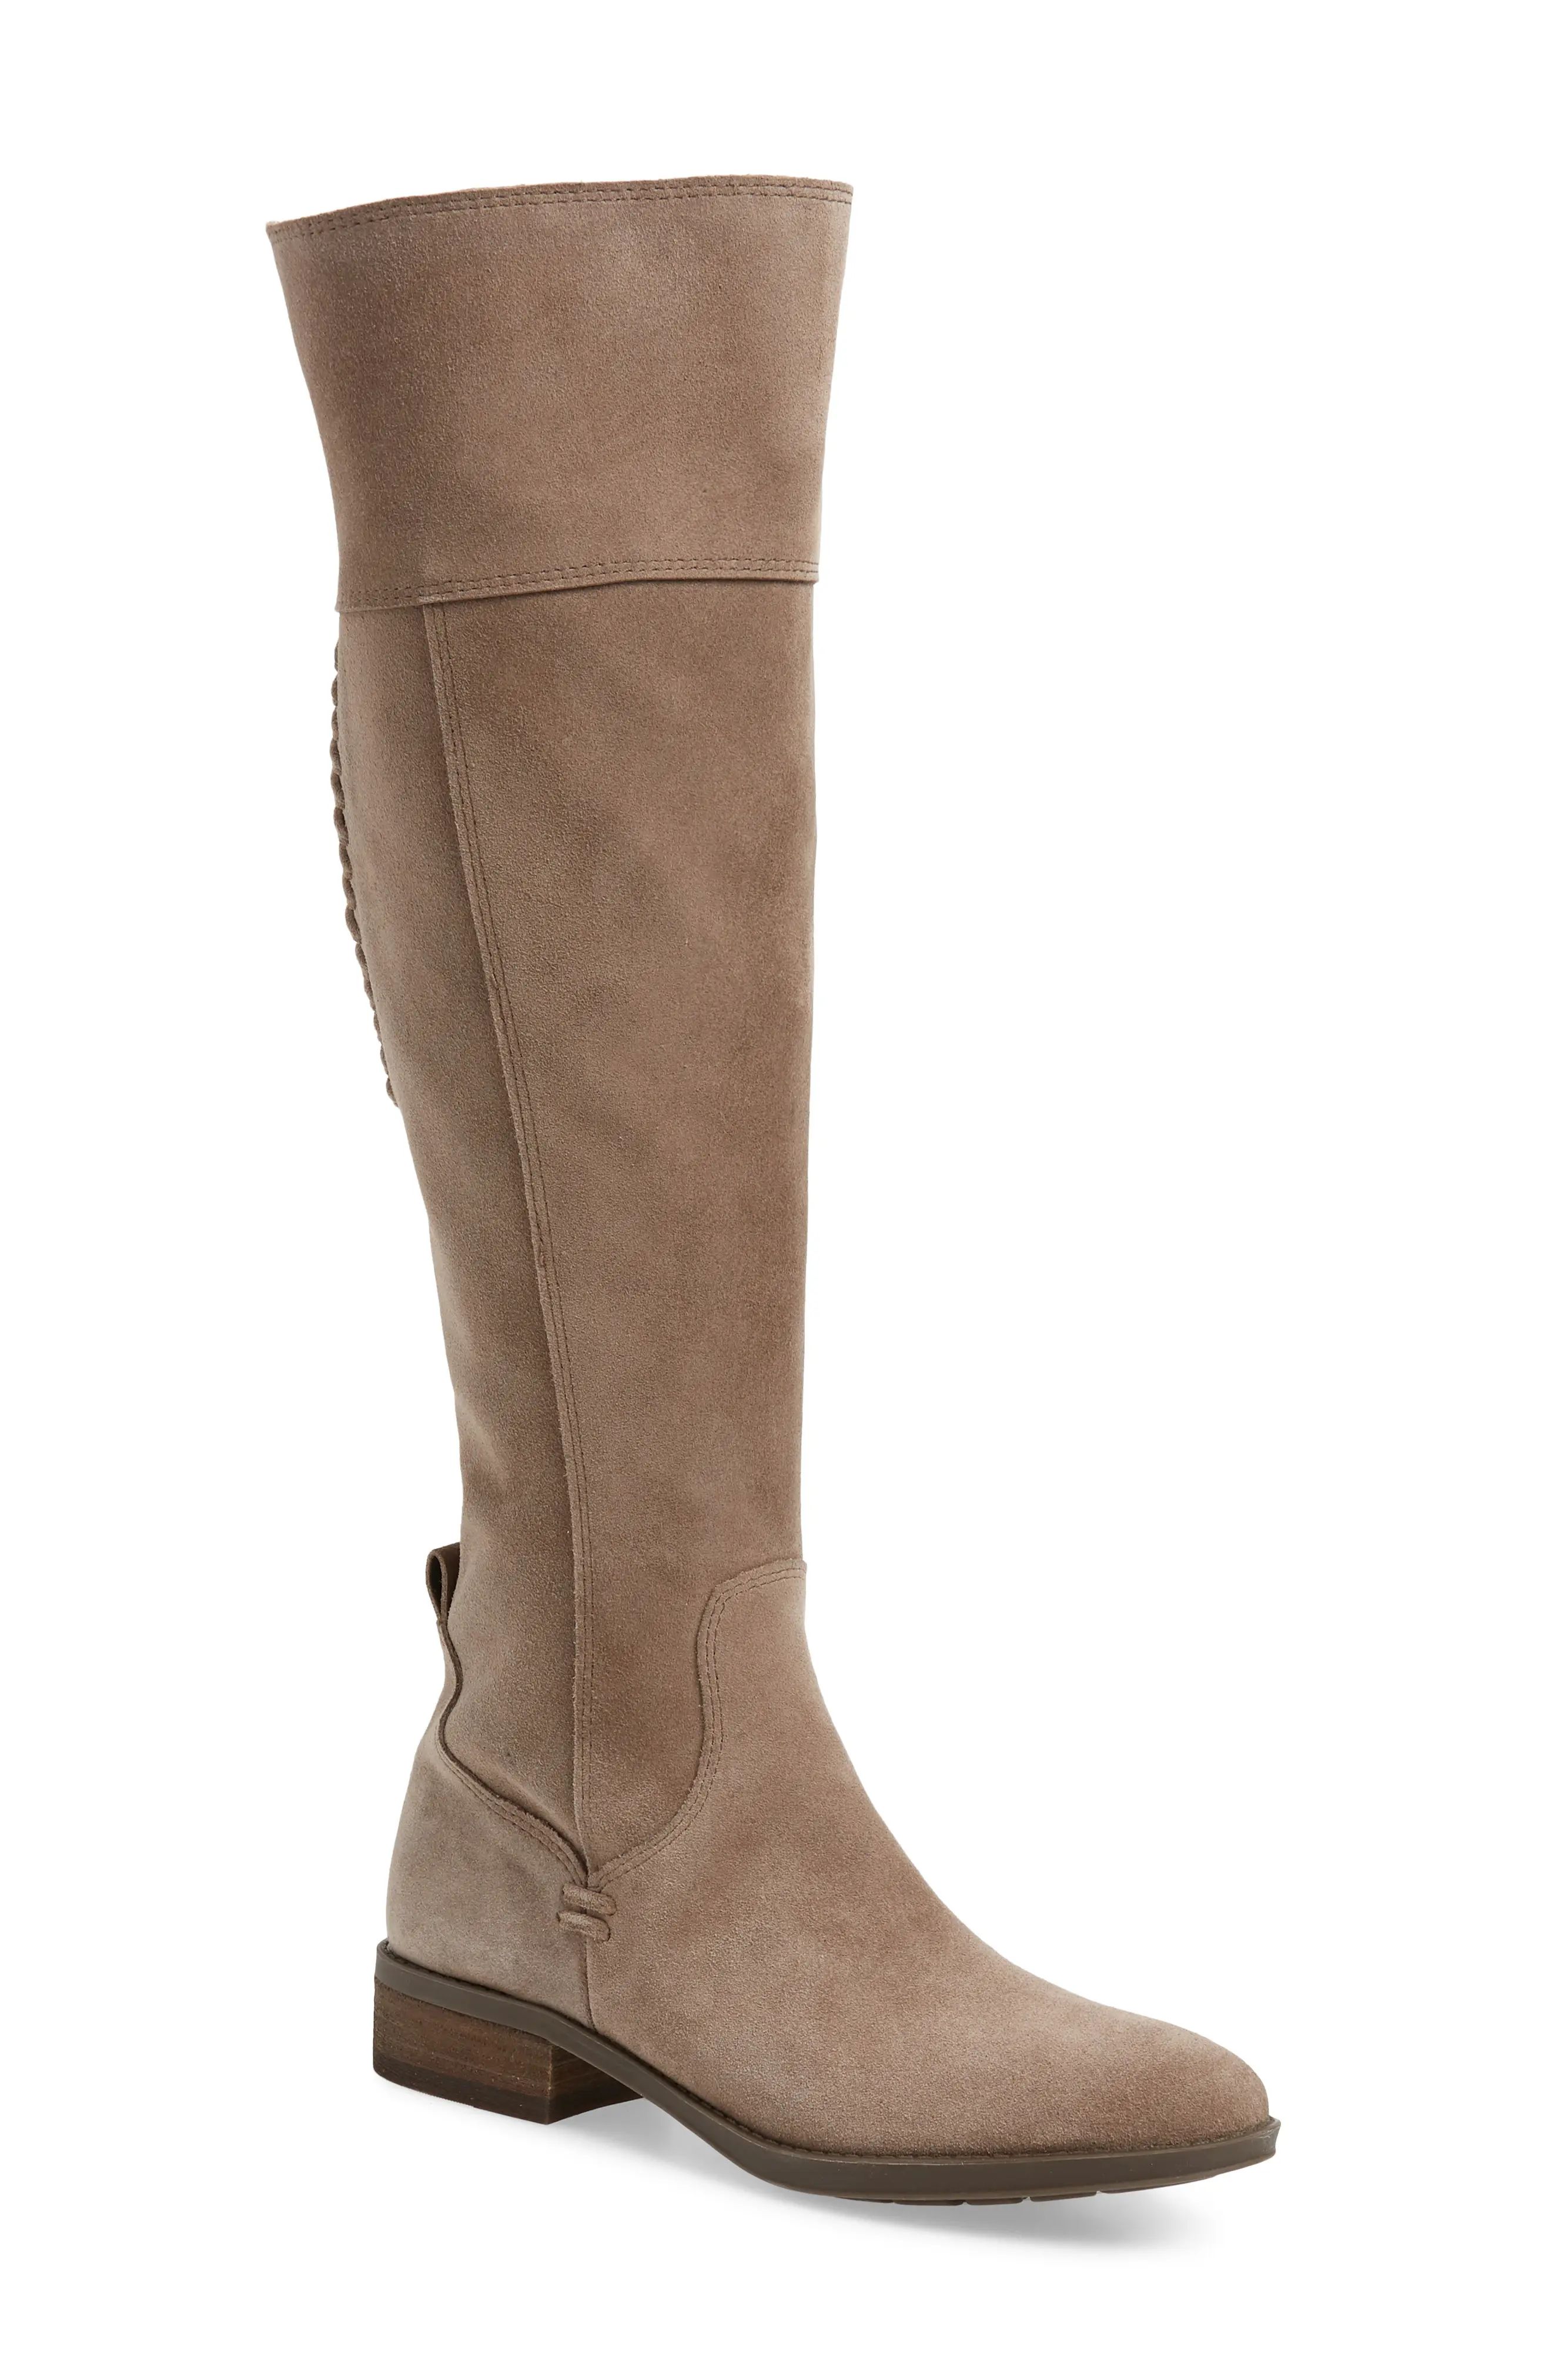 Vince Camuto Patamina Boot (Women) | Nordstrom